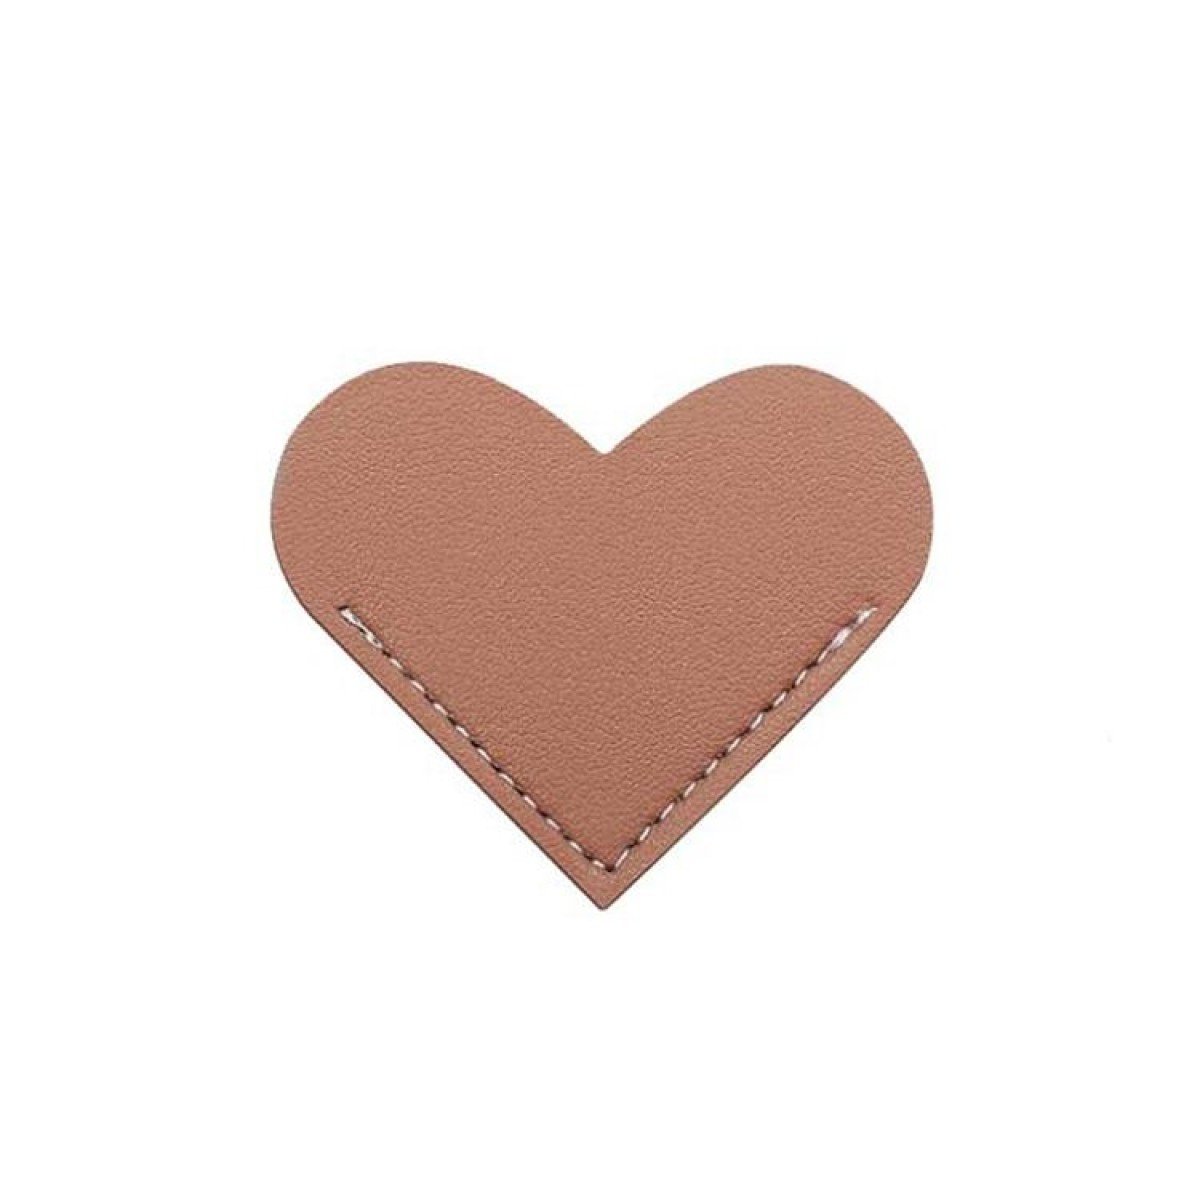 Mini Business Student Library Portable PU Leather Heart Shaped Bookmark(Milk Tea Brown)